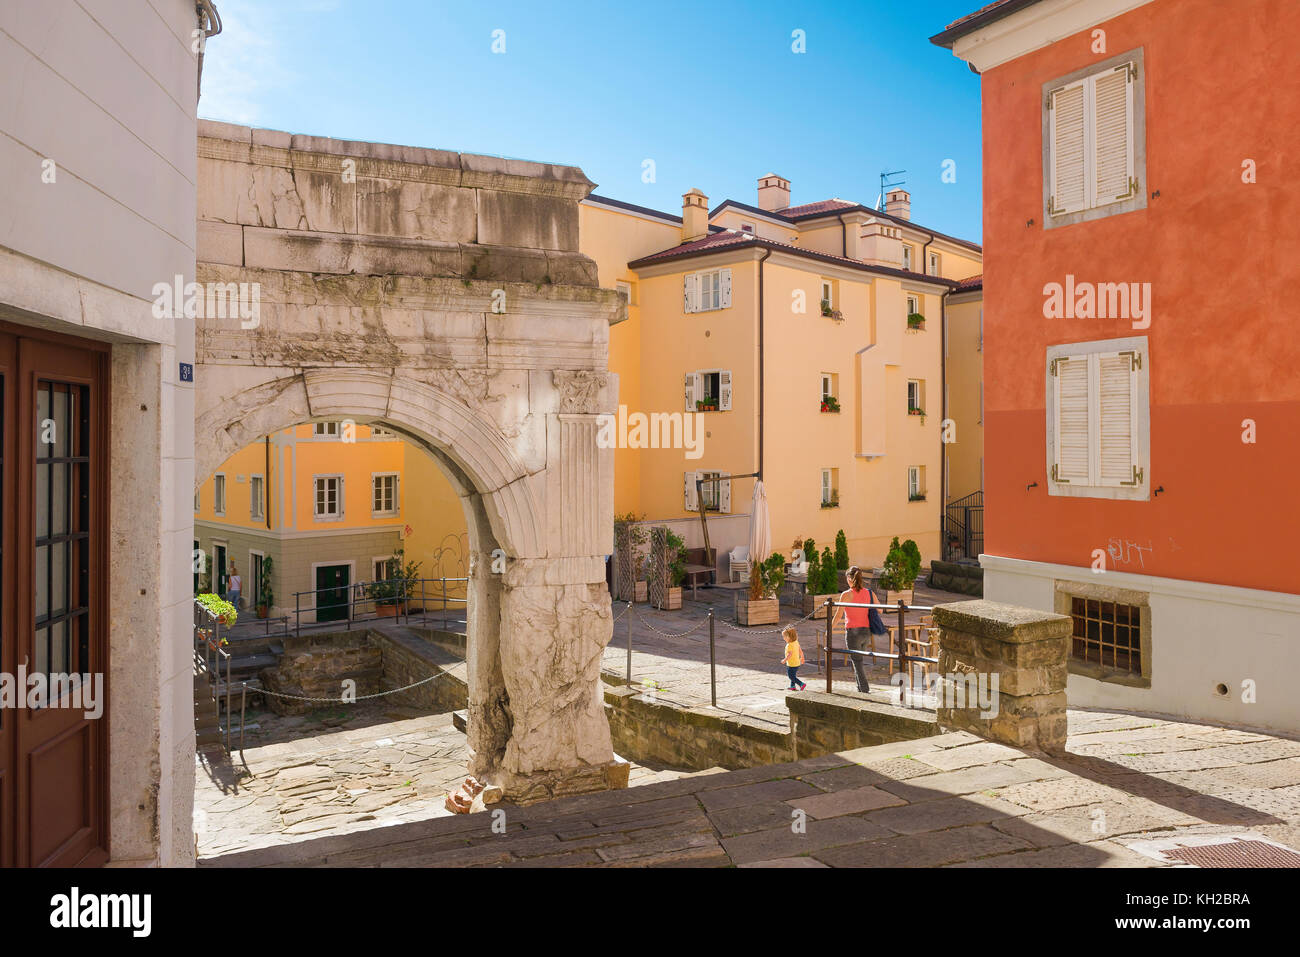 Trieste Old Town Ancient Roman Arch Known As The Arco Di Riccardo Stock Photo Alamy